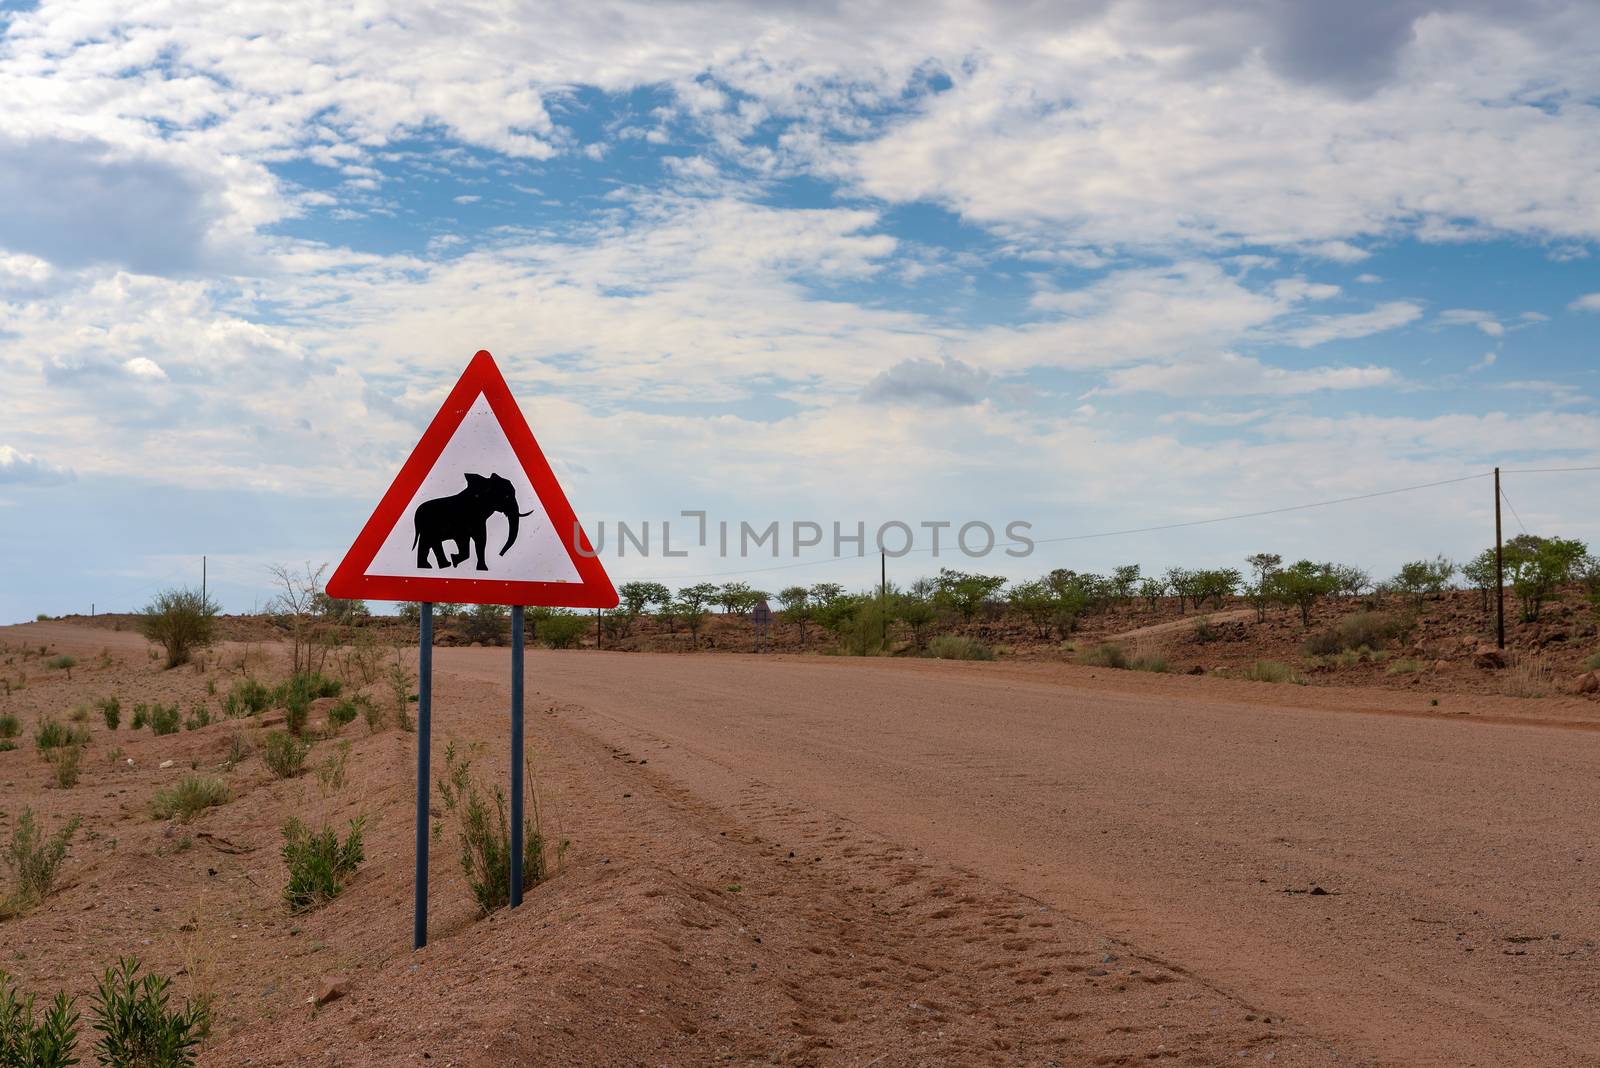 Elephant crossing warning road sign placed in the desert of Namibia by nickfox